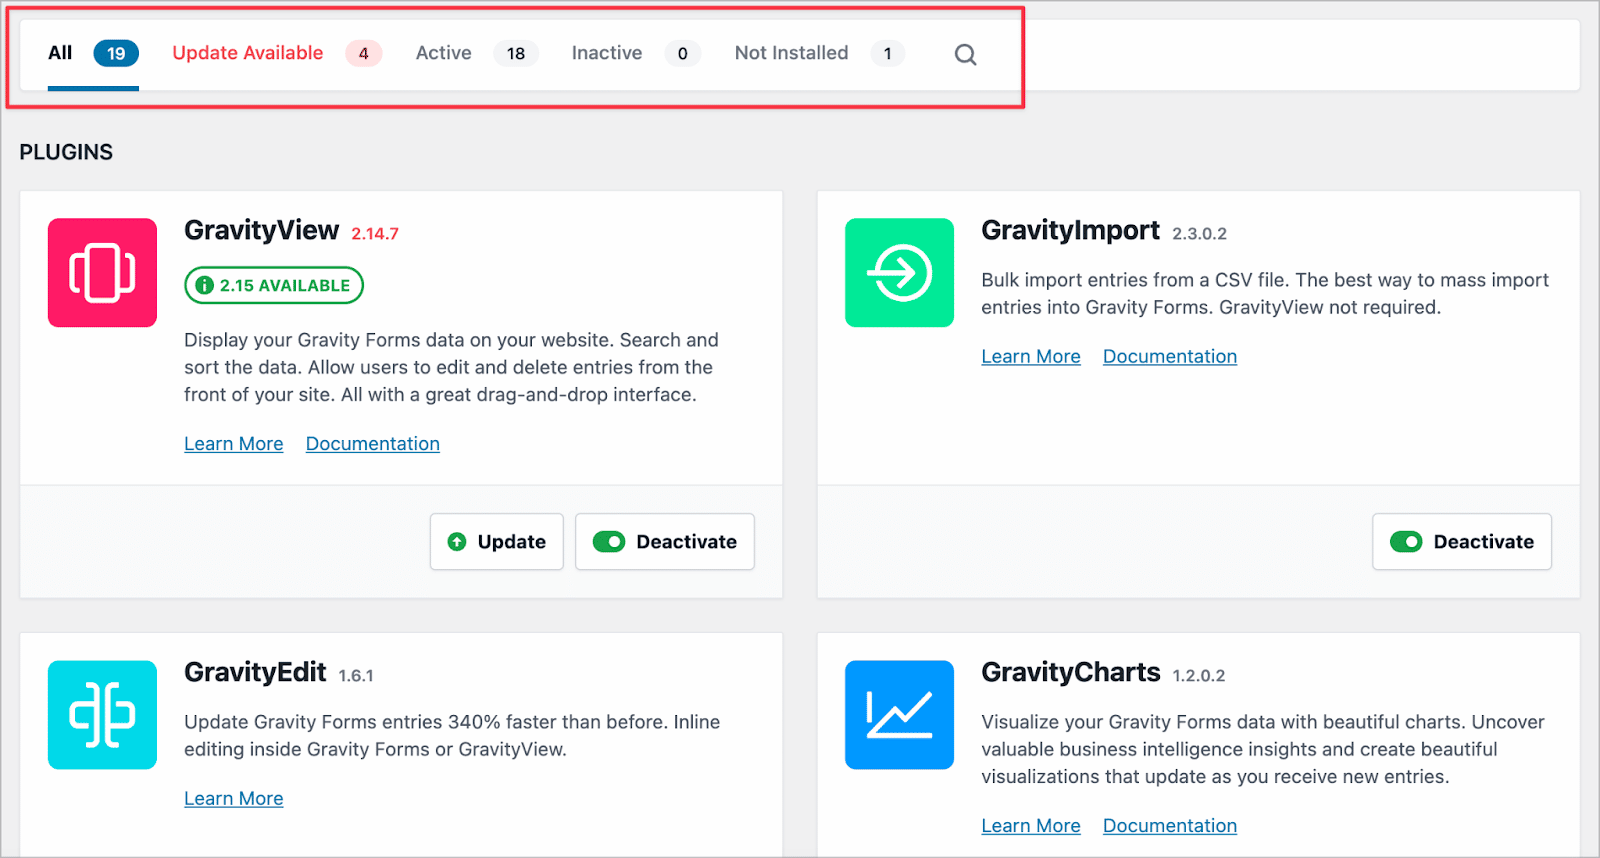 an overview of all GravityKit plugins, extensions and layouts. The top bar provides several links for filtering products based on their current status on your site.